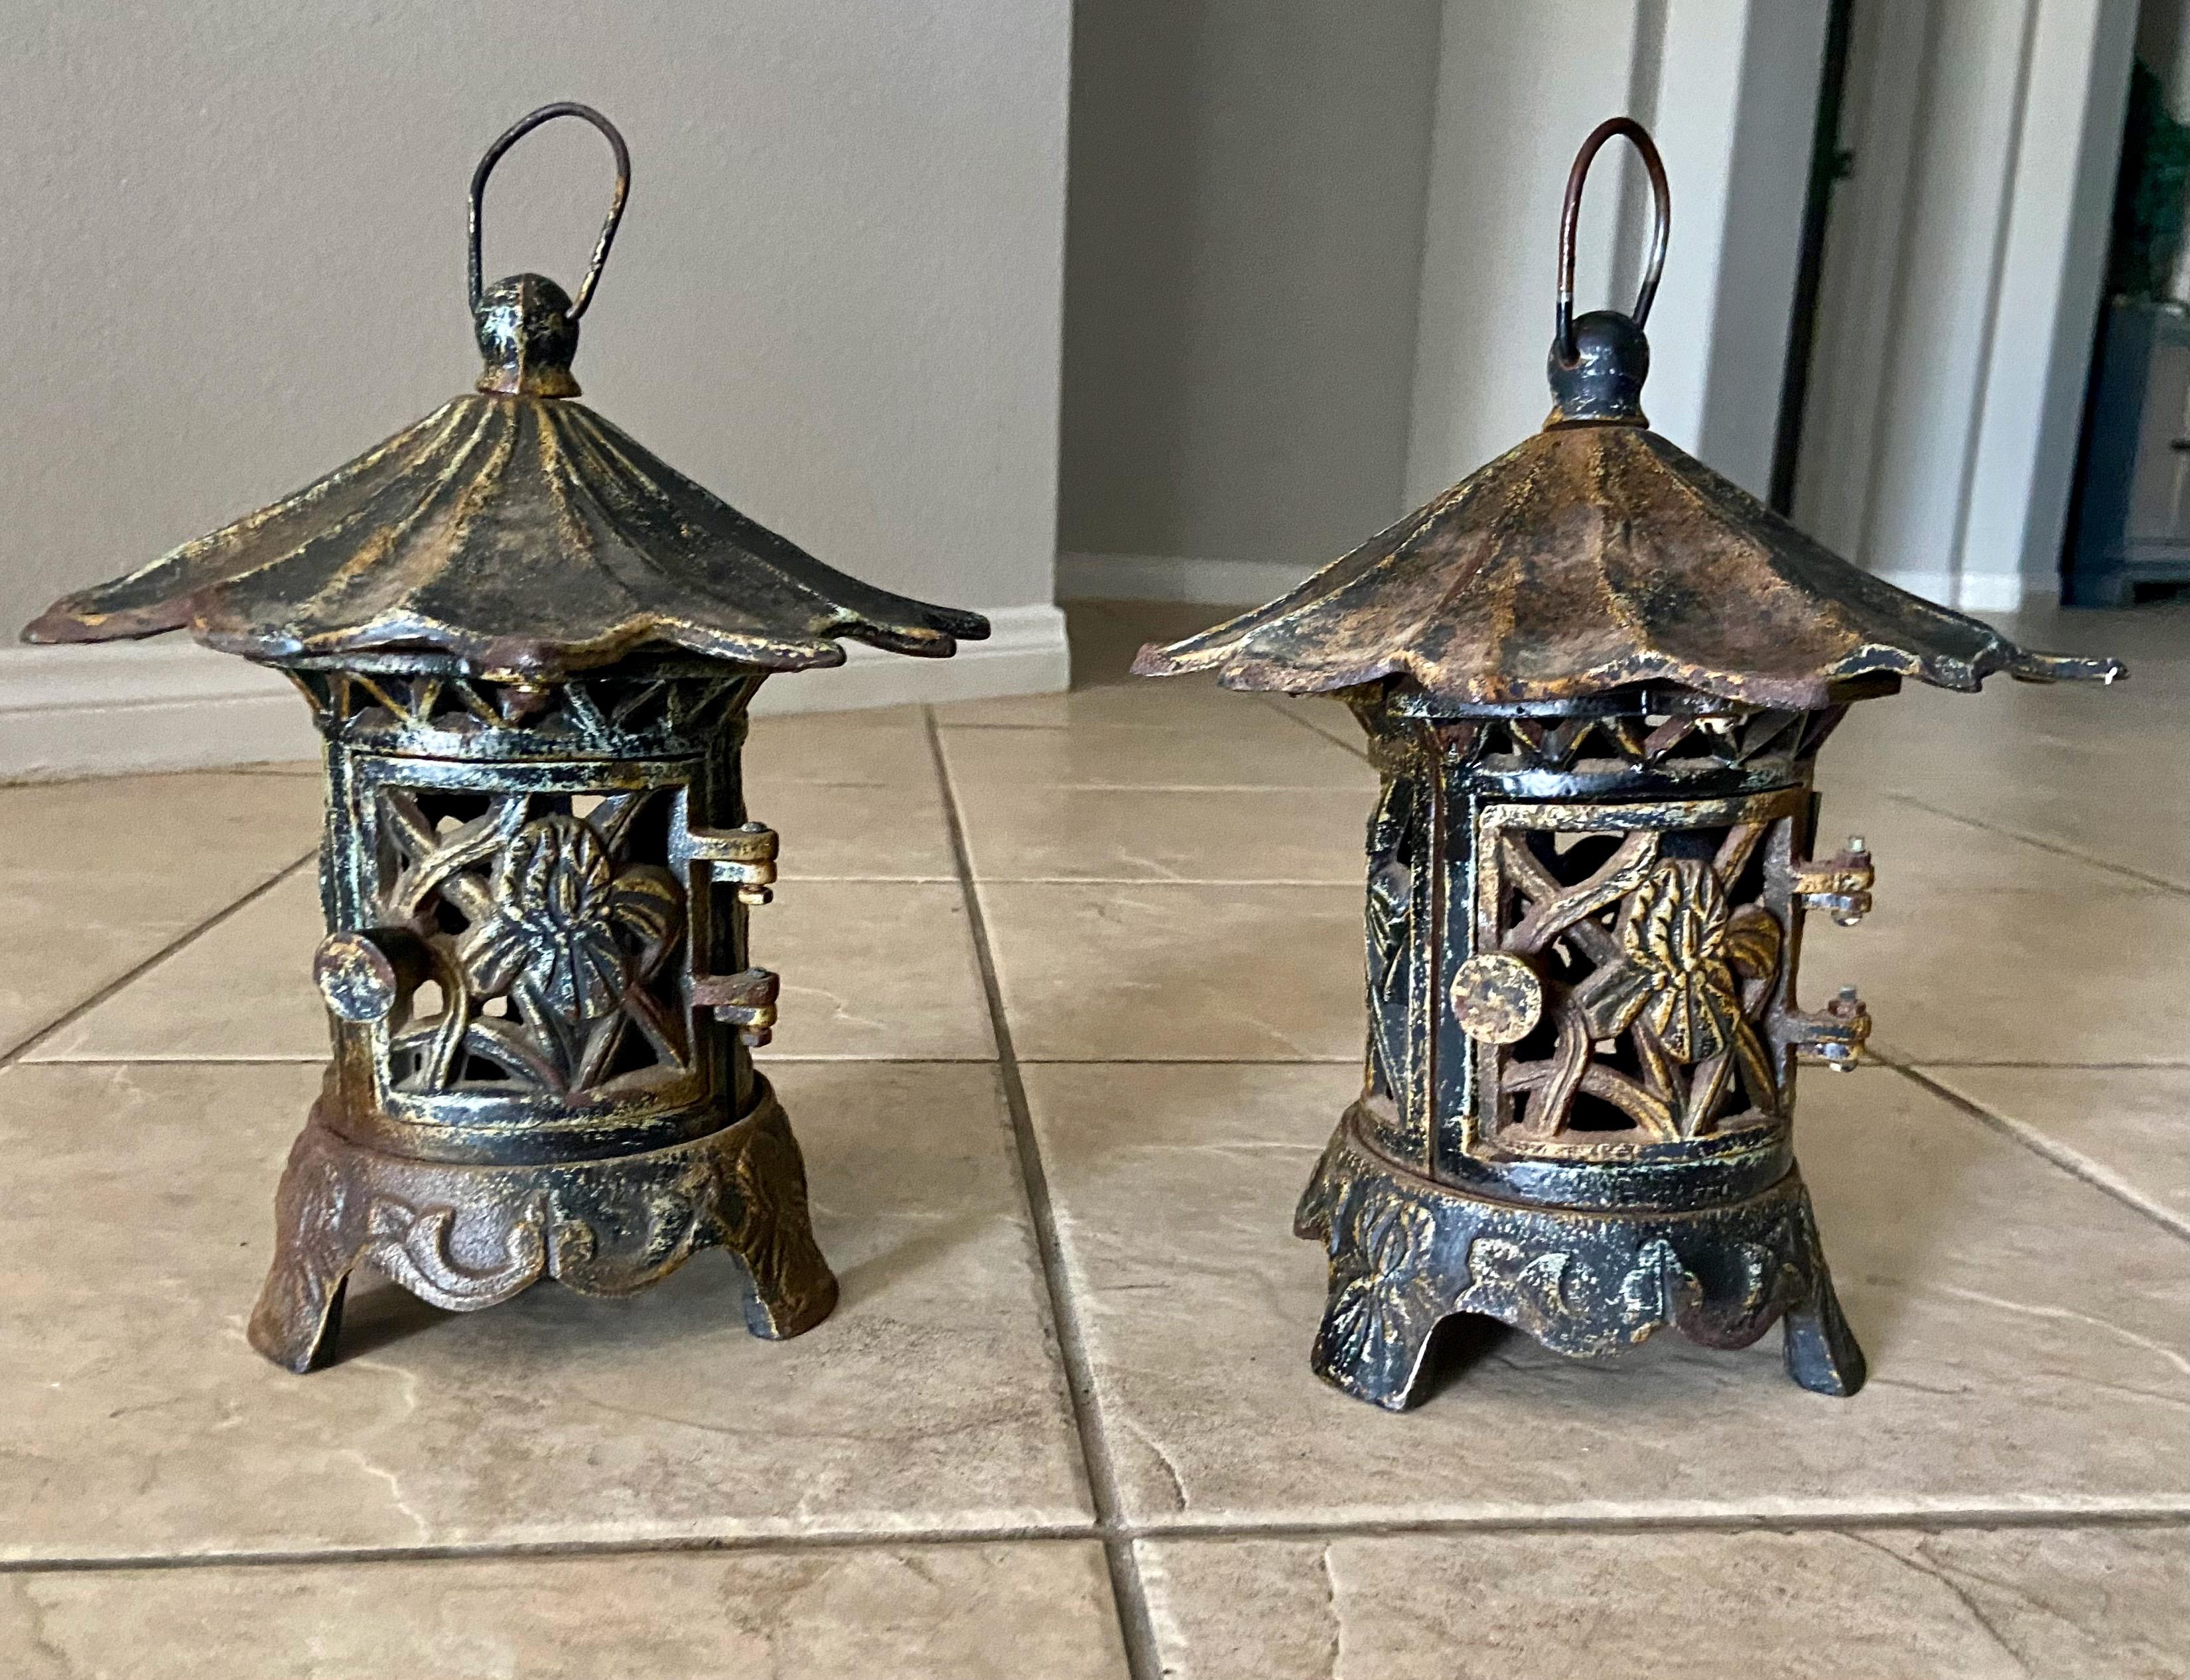 Pair of antique Chinese heavy cast iron pagoda garden lanterns with original patina, having a handle for hanging, hinged cage door and openwork screen sides, adorned with traditional Asian motif detailing. Single tea candle holder interior. Stamped